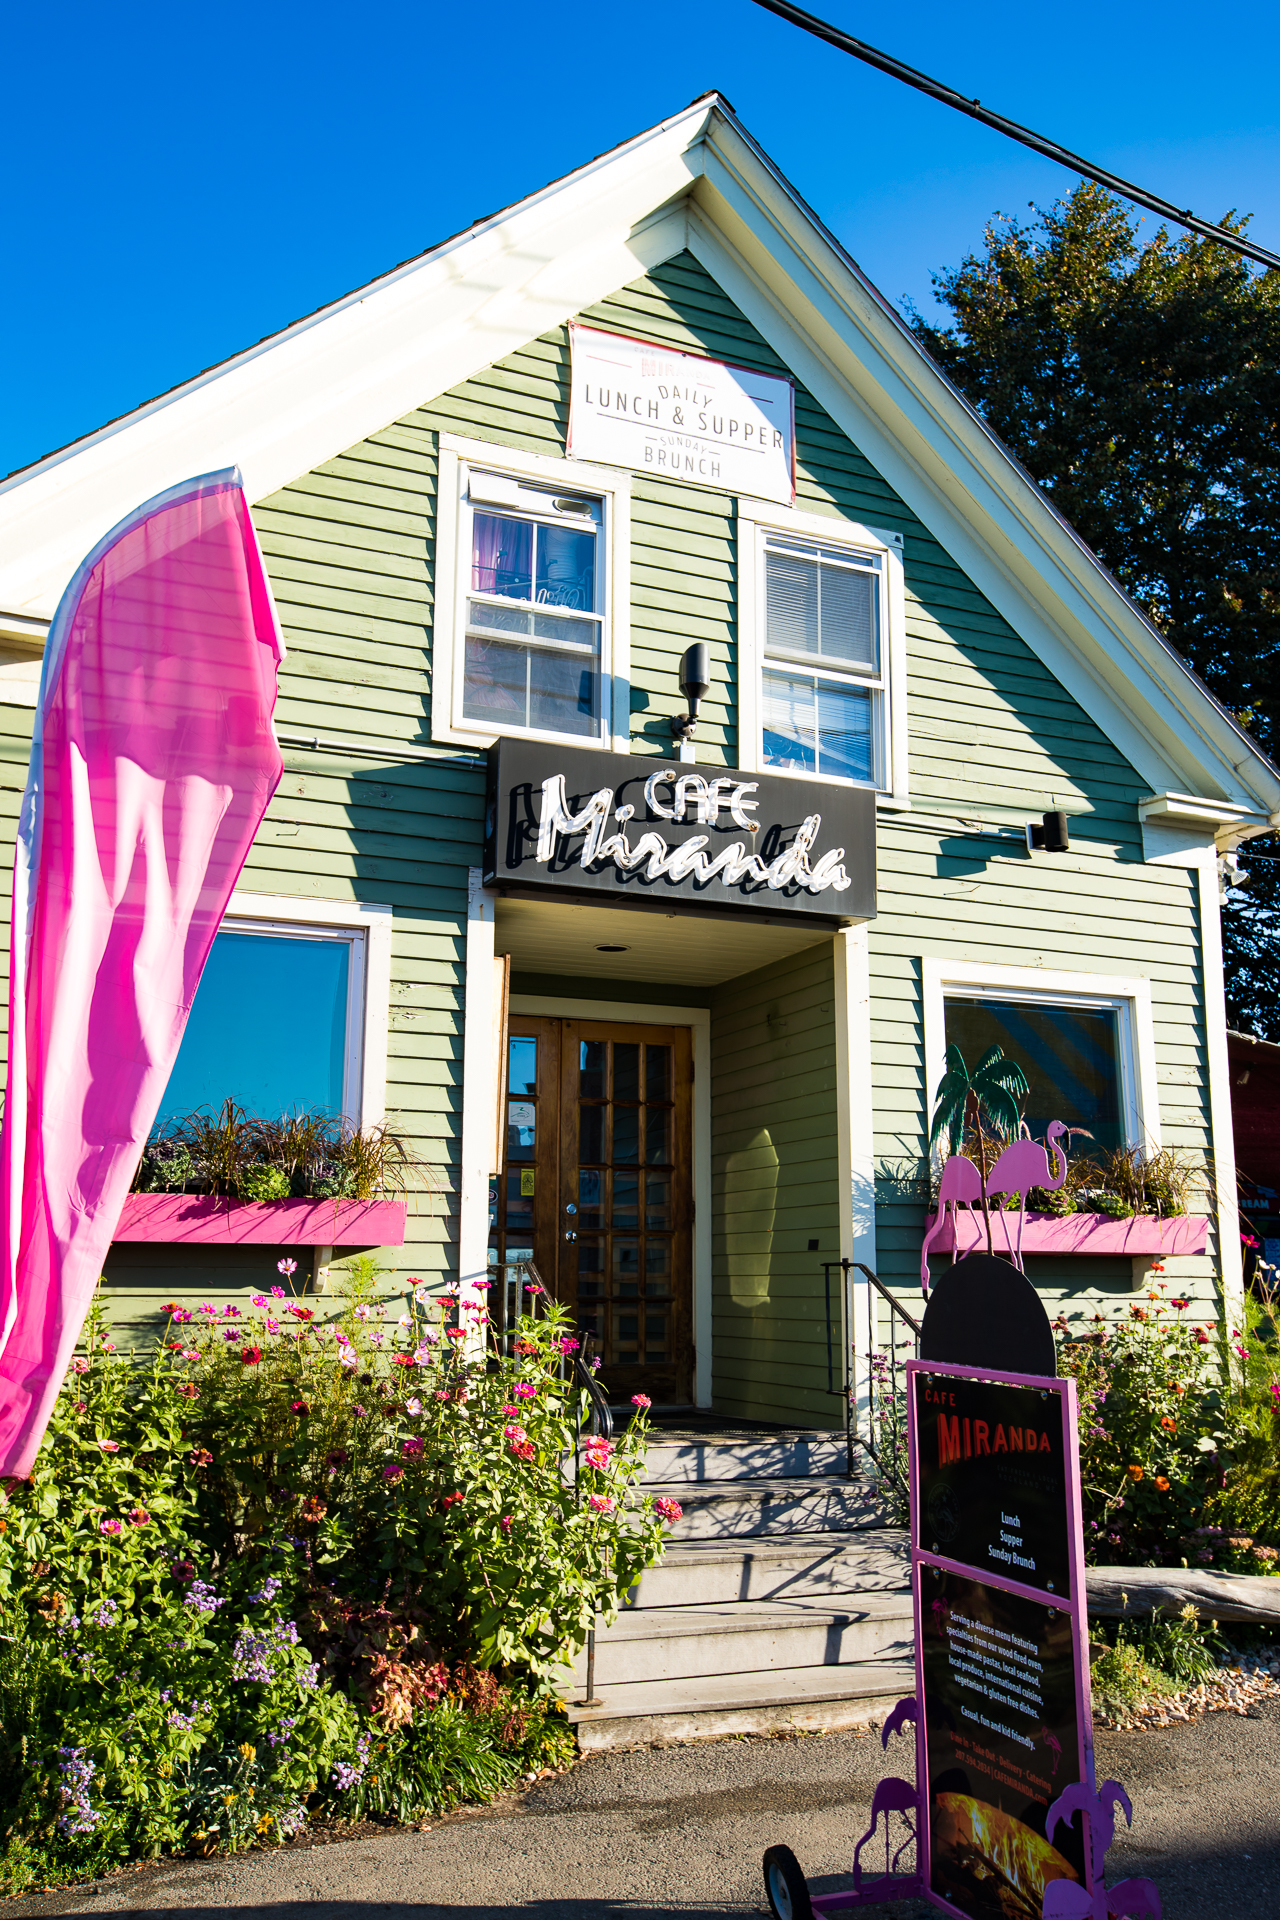 Reasons to Visit Rockland, Maine with 250 Main Hotel